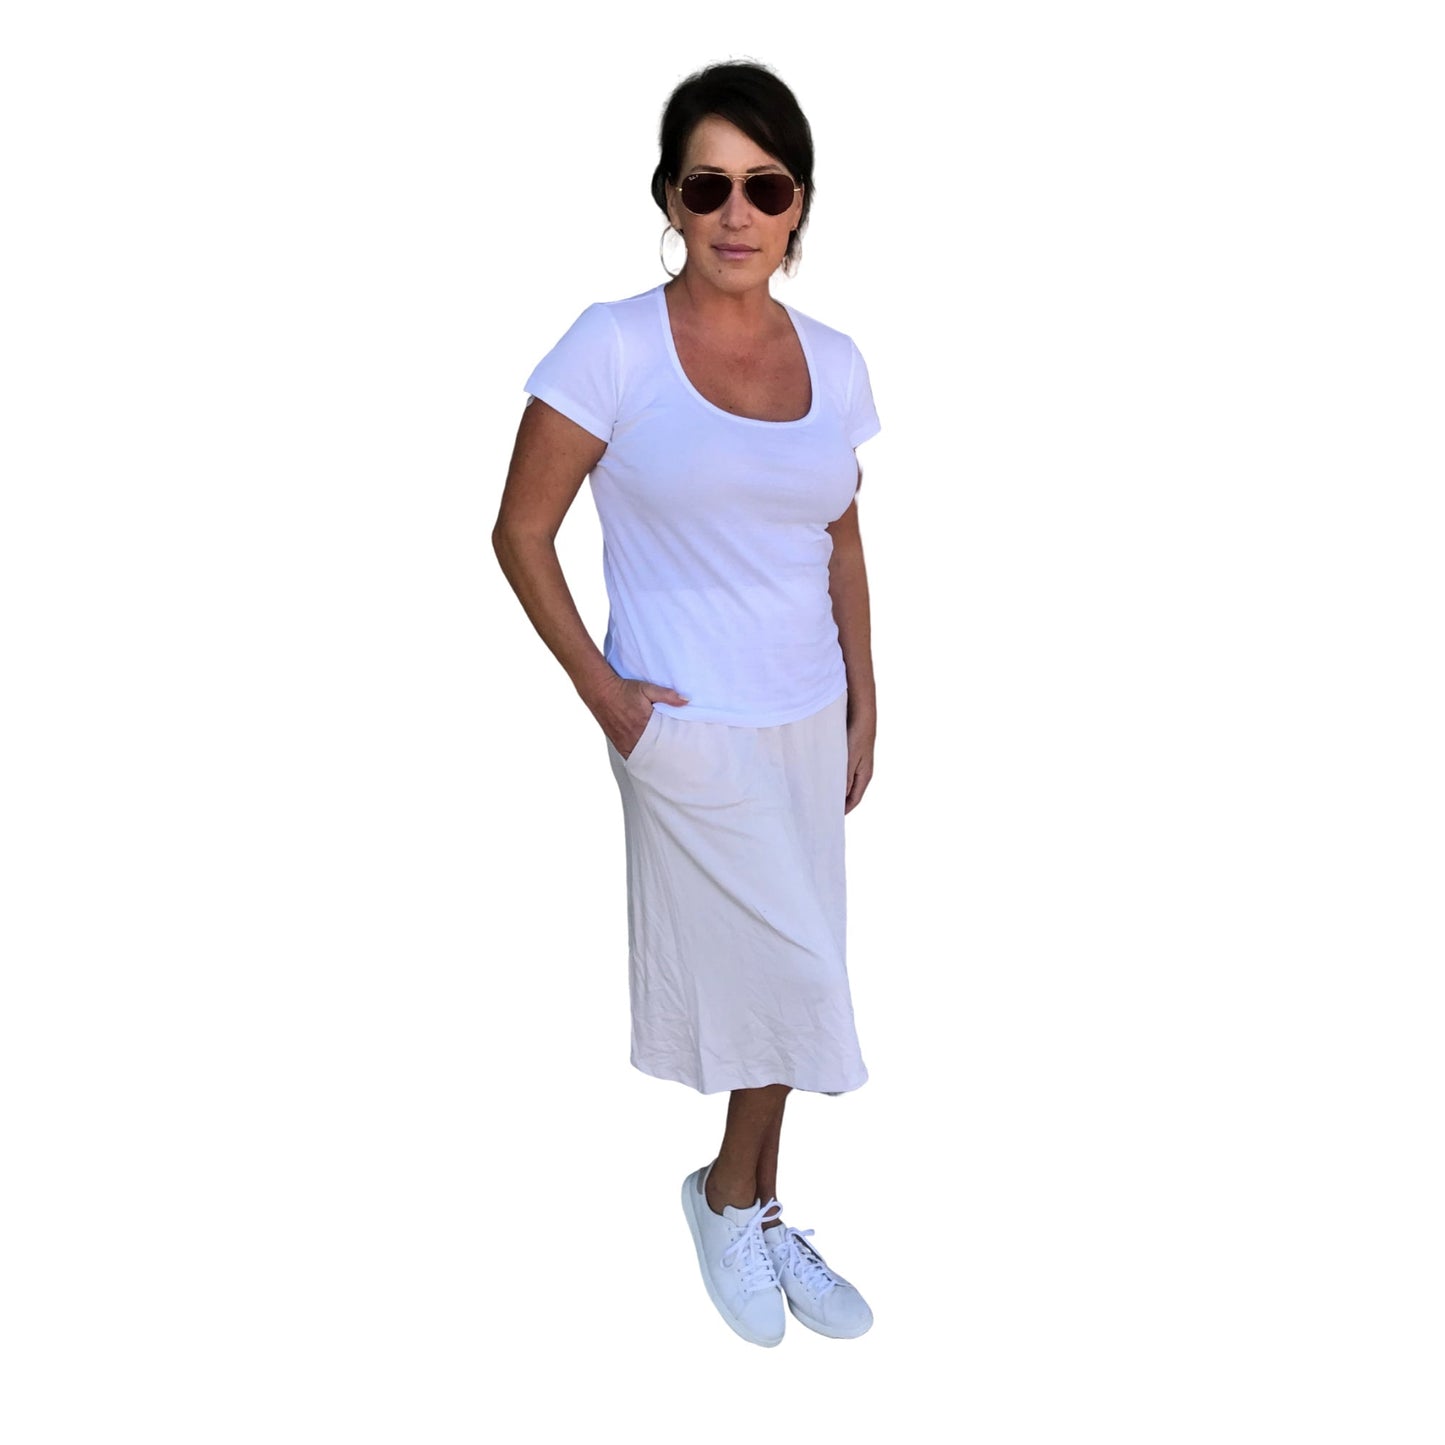 Ultra Luxurious Activewear Athleisure Skirt Modest Travel Clothing Cream Color Non-See Through Modal Cotton Thick Golf Skirt Sun Protection